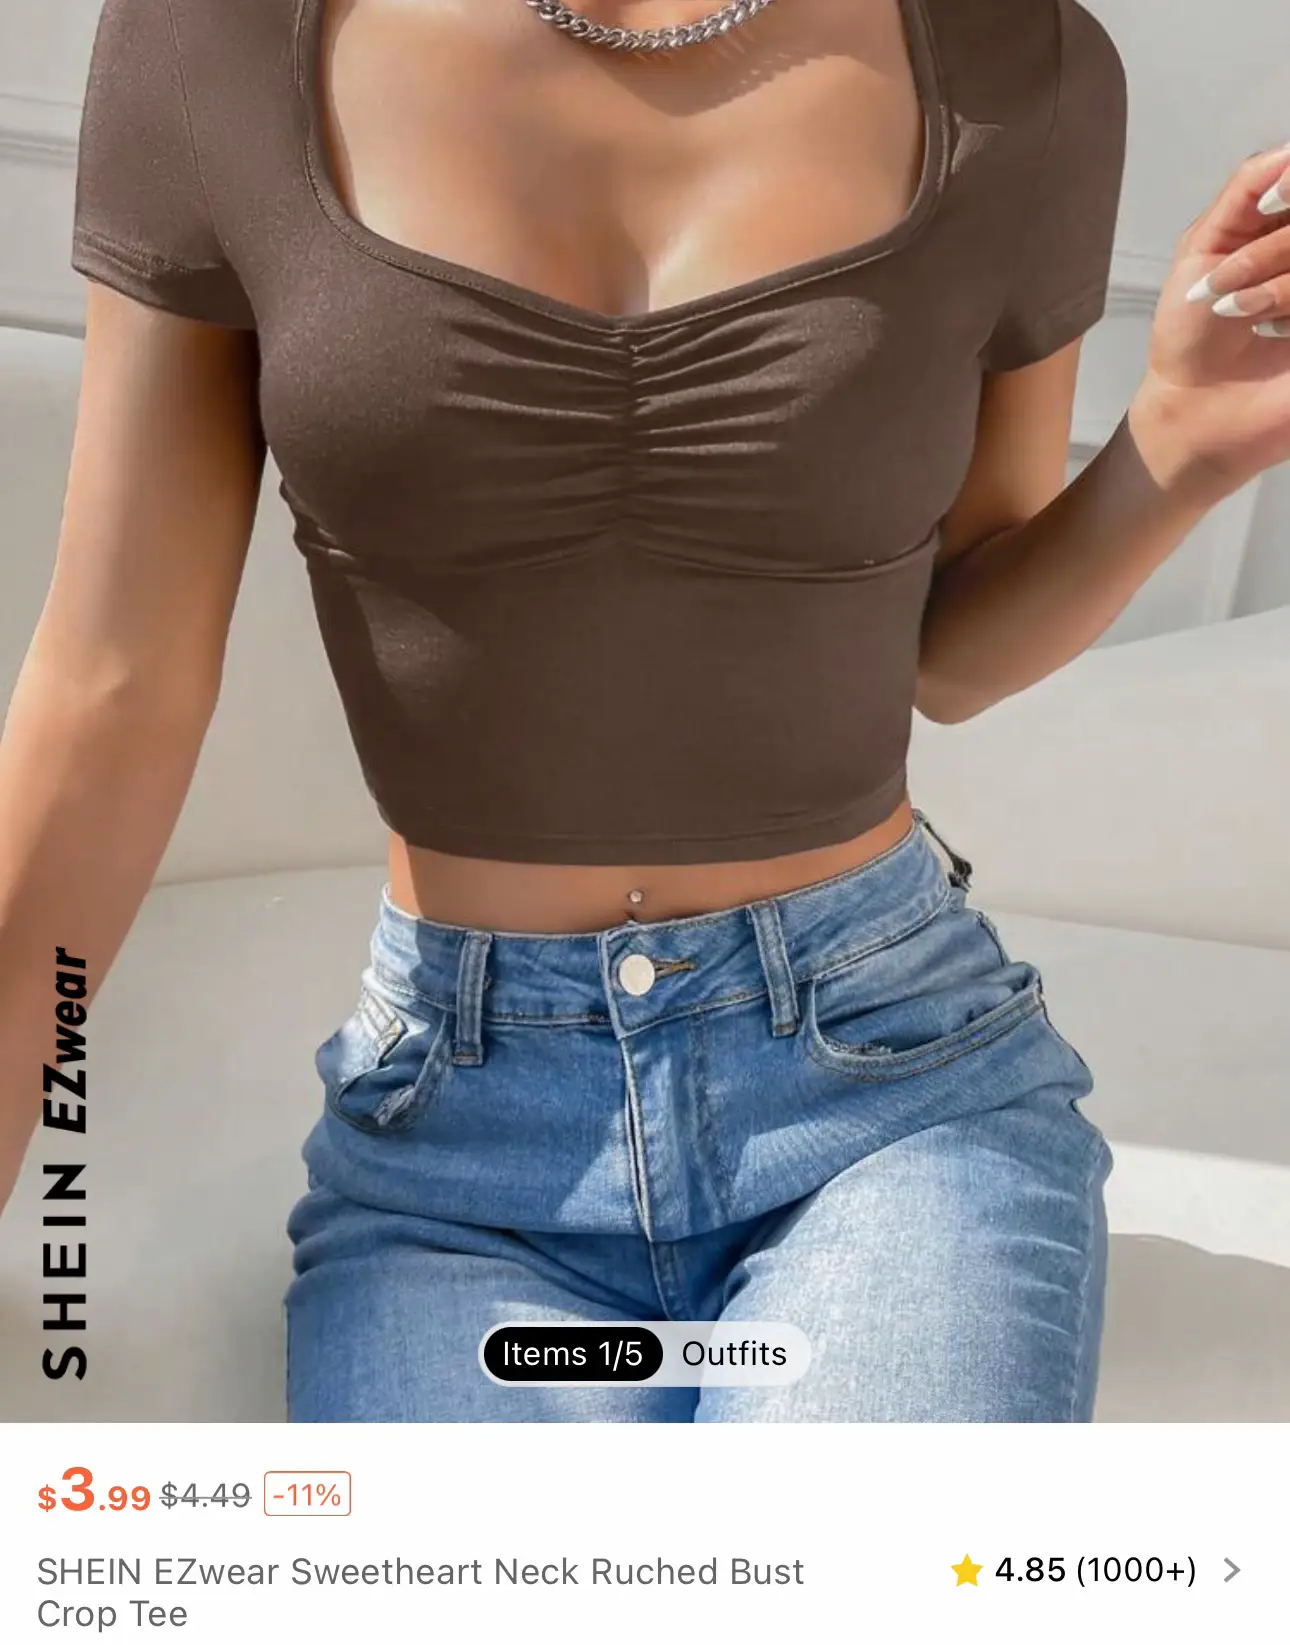 Sweetheart Neck Ruched Bust Crop Tee